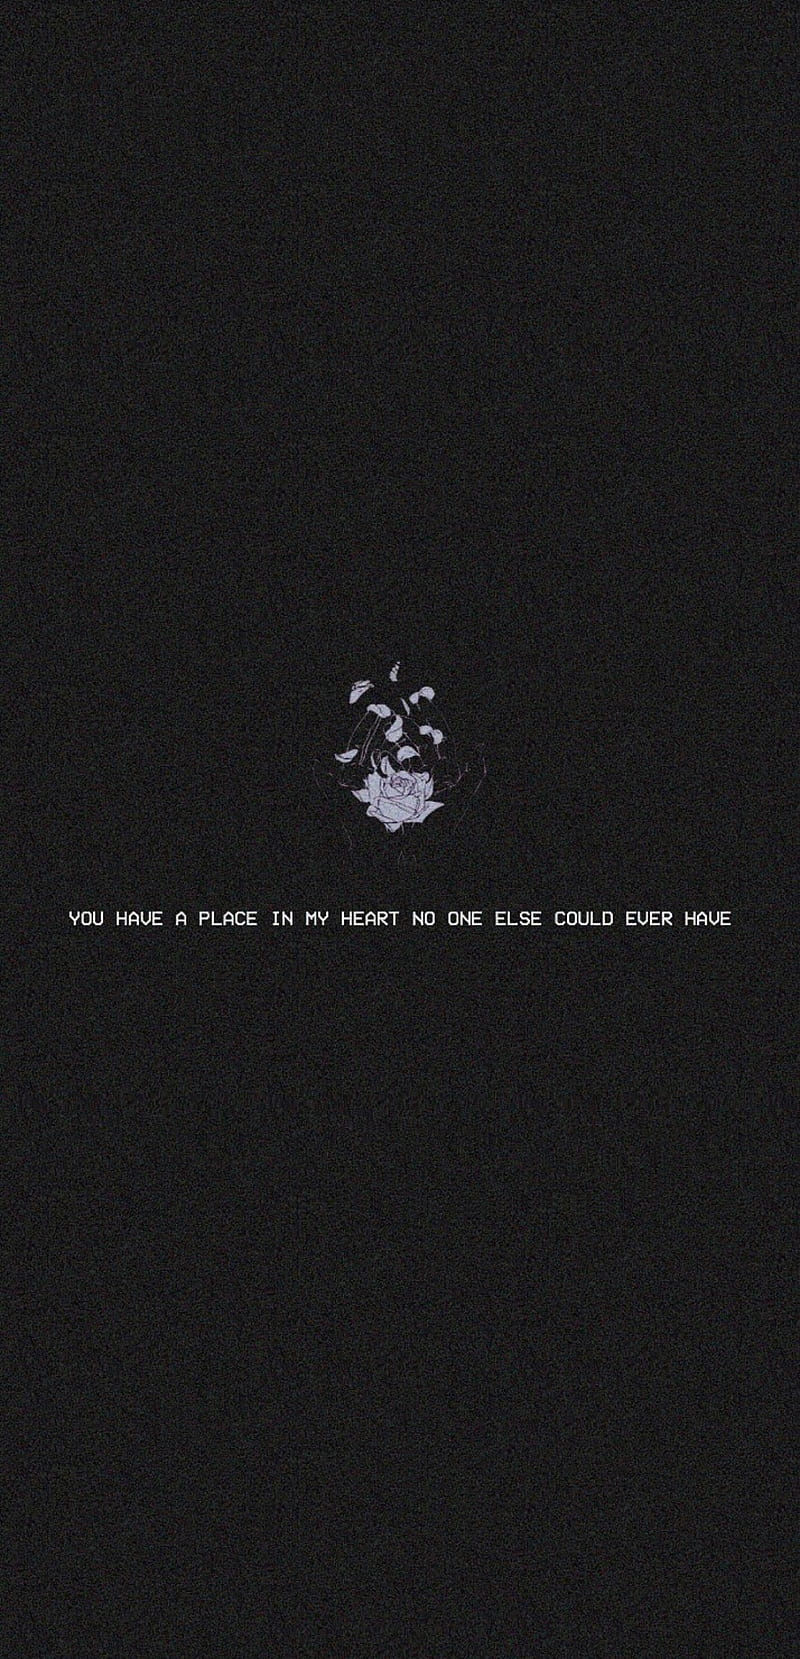 Black background wallpaper with a quote that says 